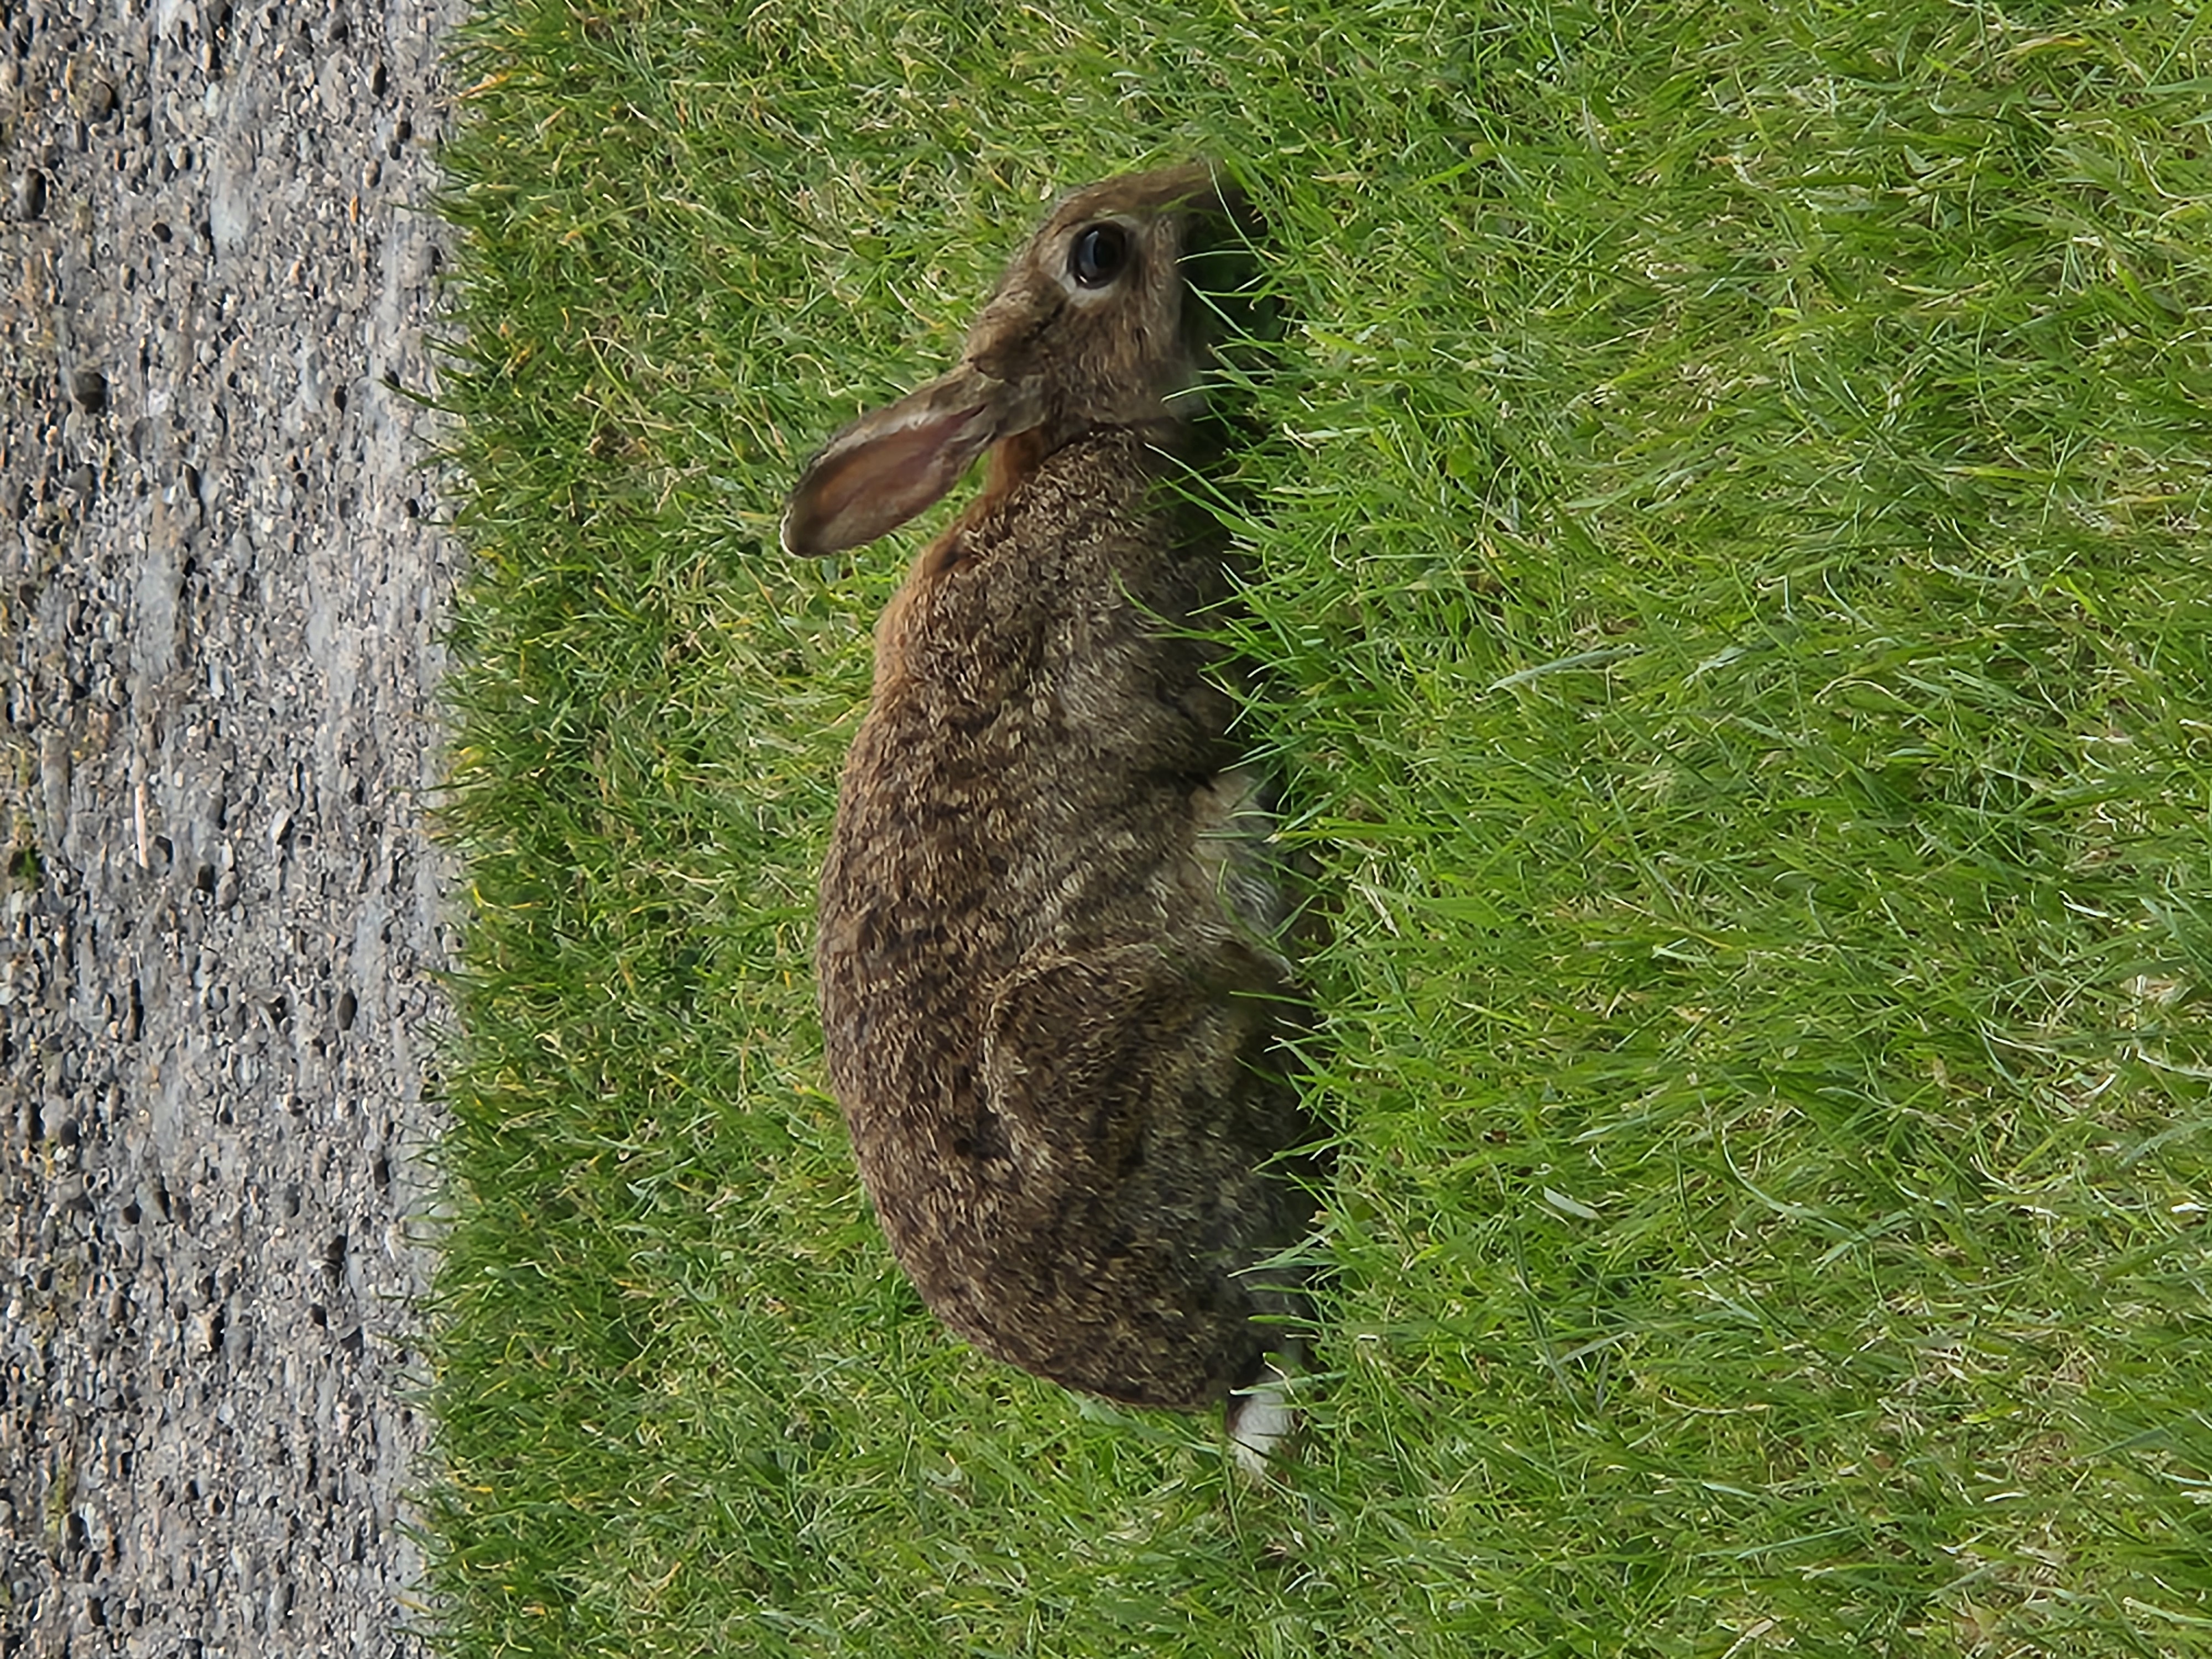 Rabbit, its brown and nibbling the grass